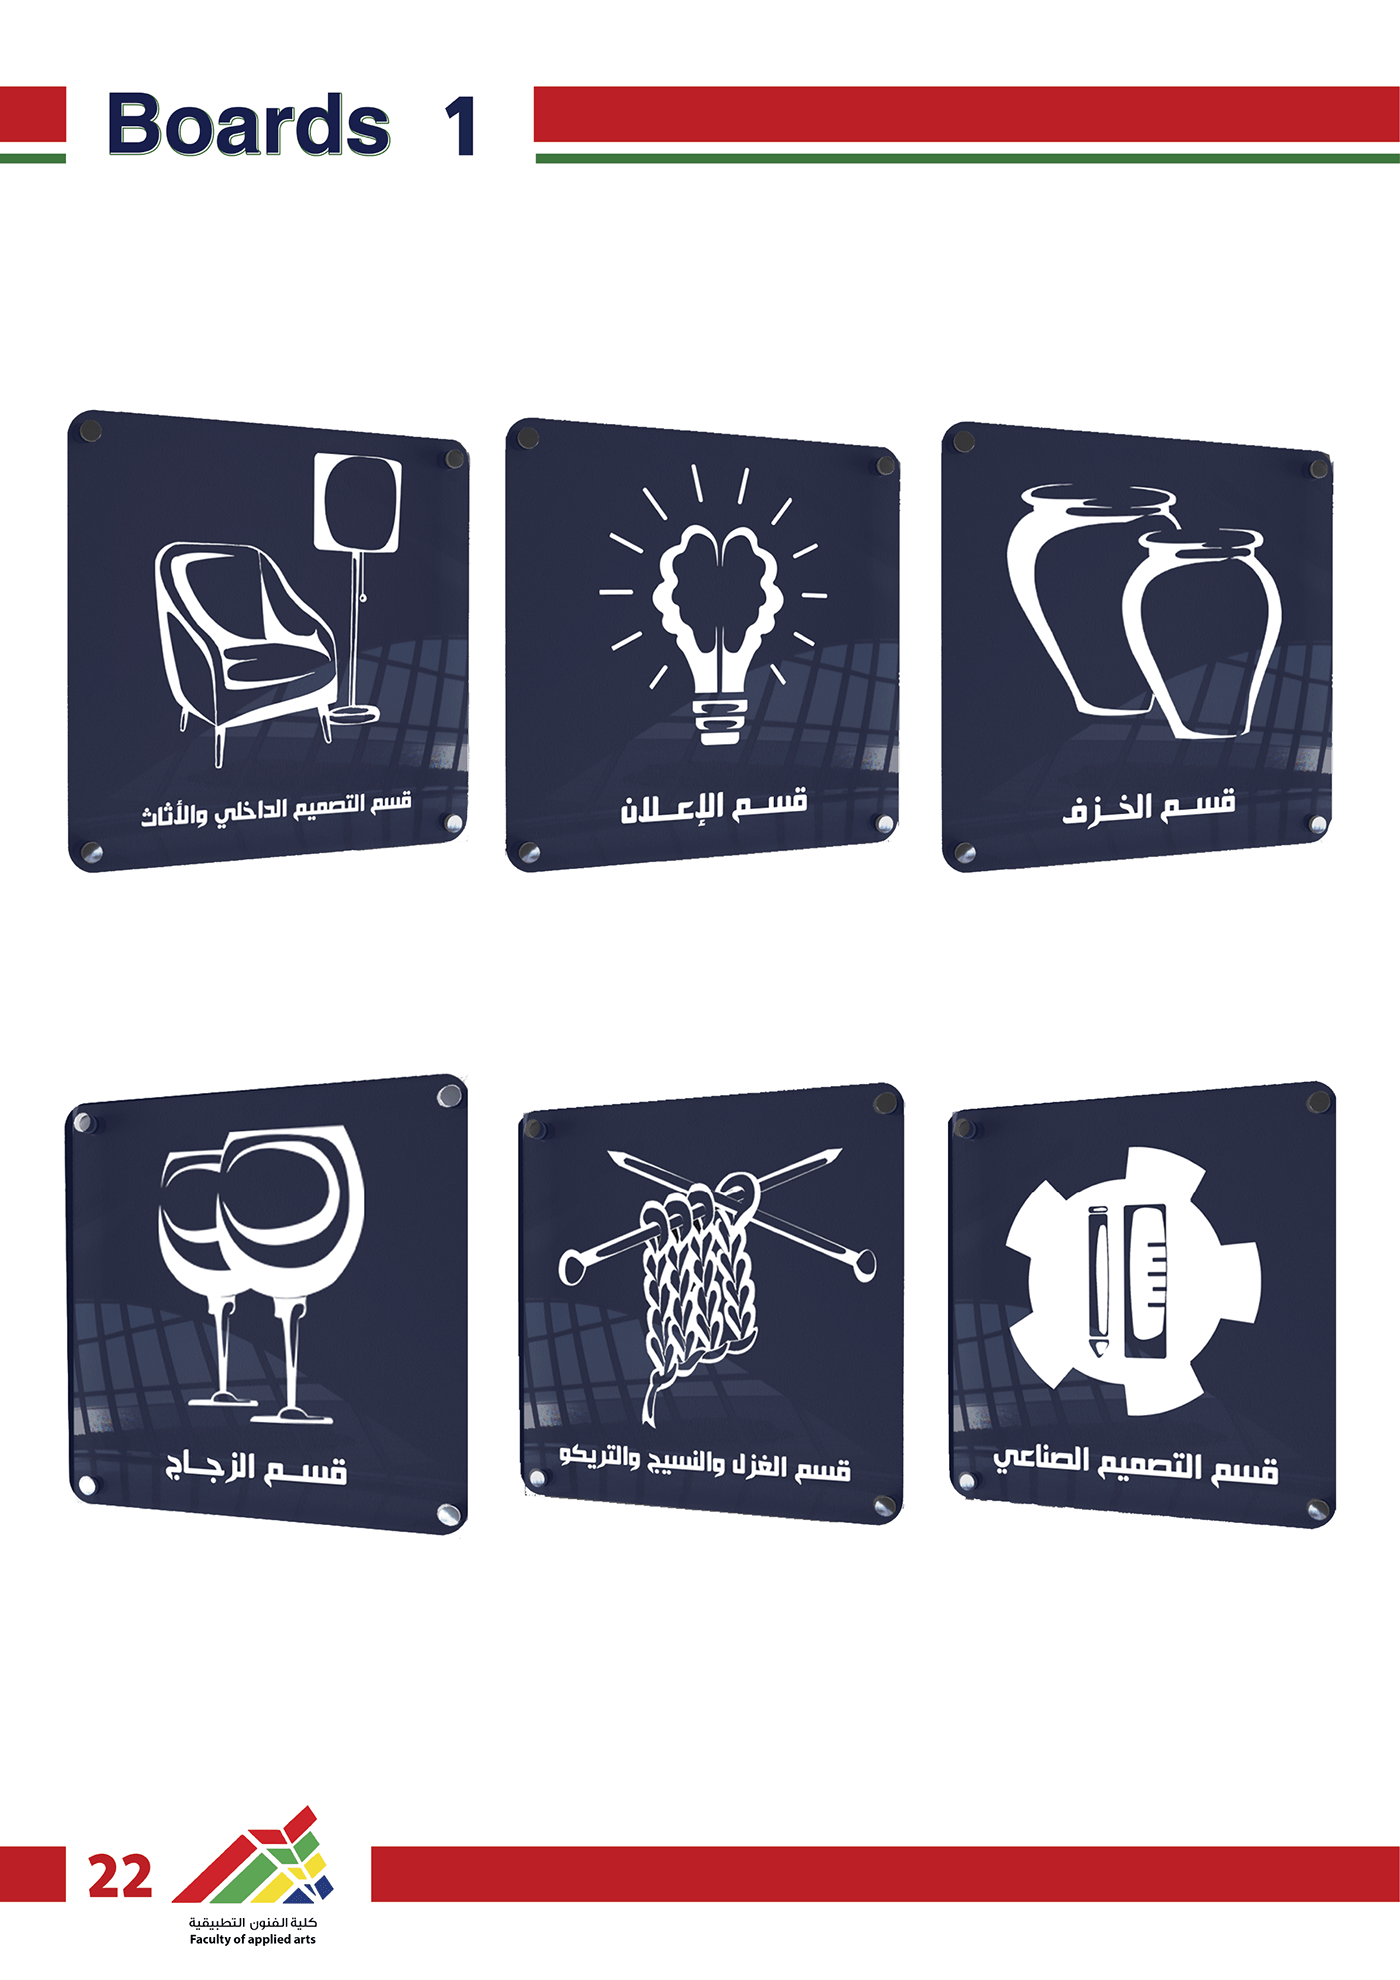 #sign #system Advertising  applied arts Board colors design helwan icon design  sketch